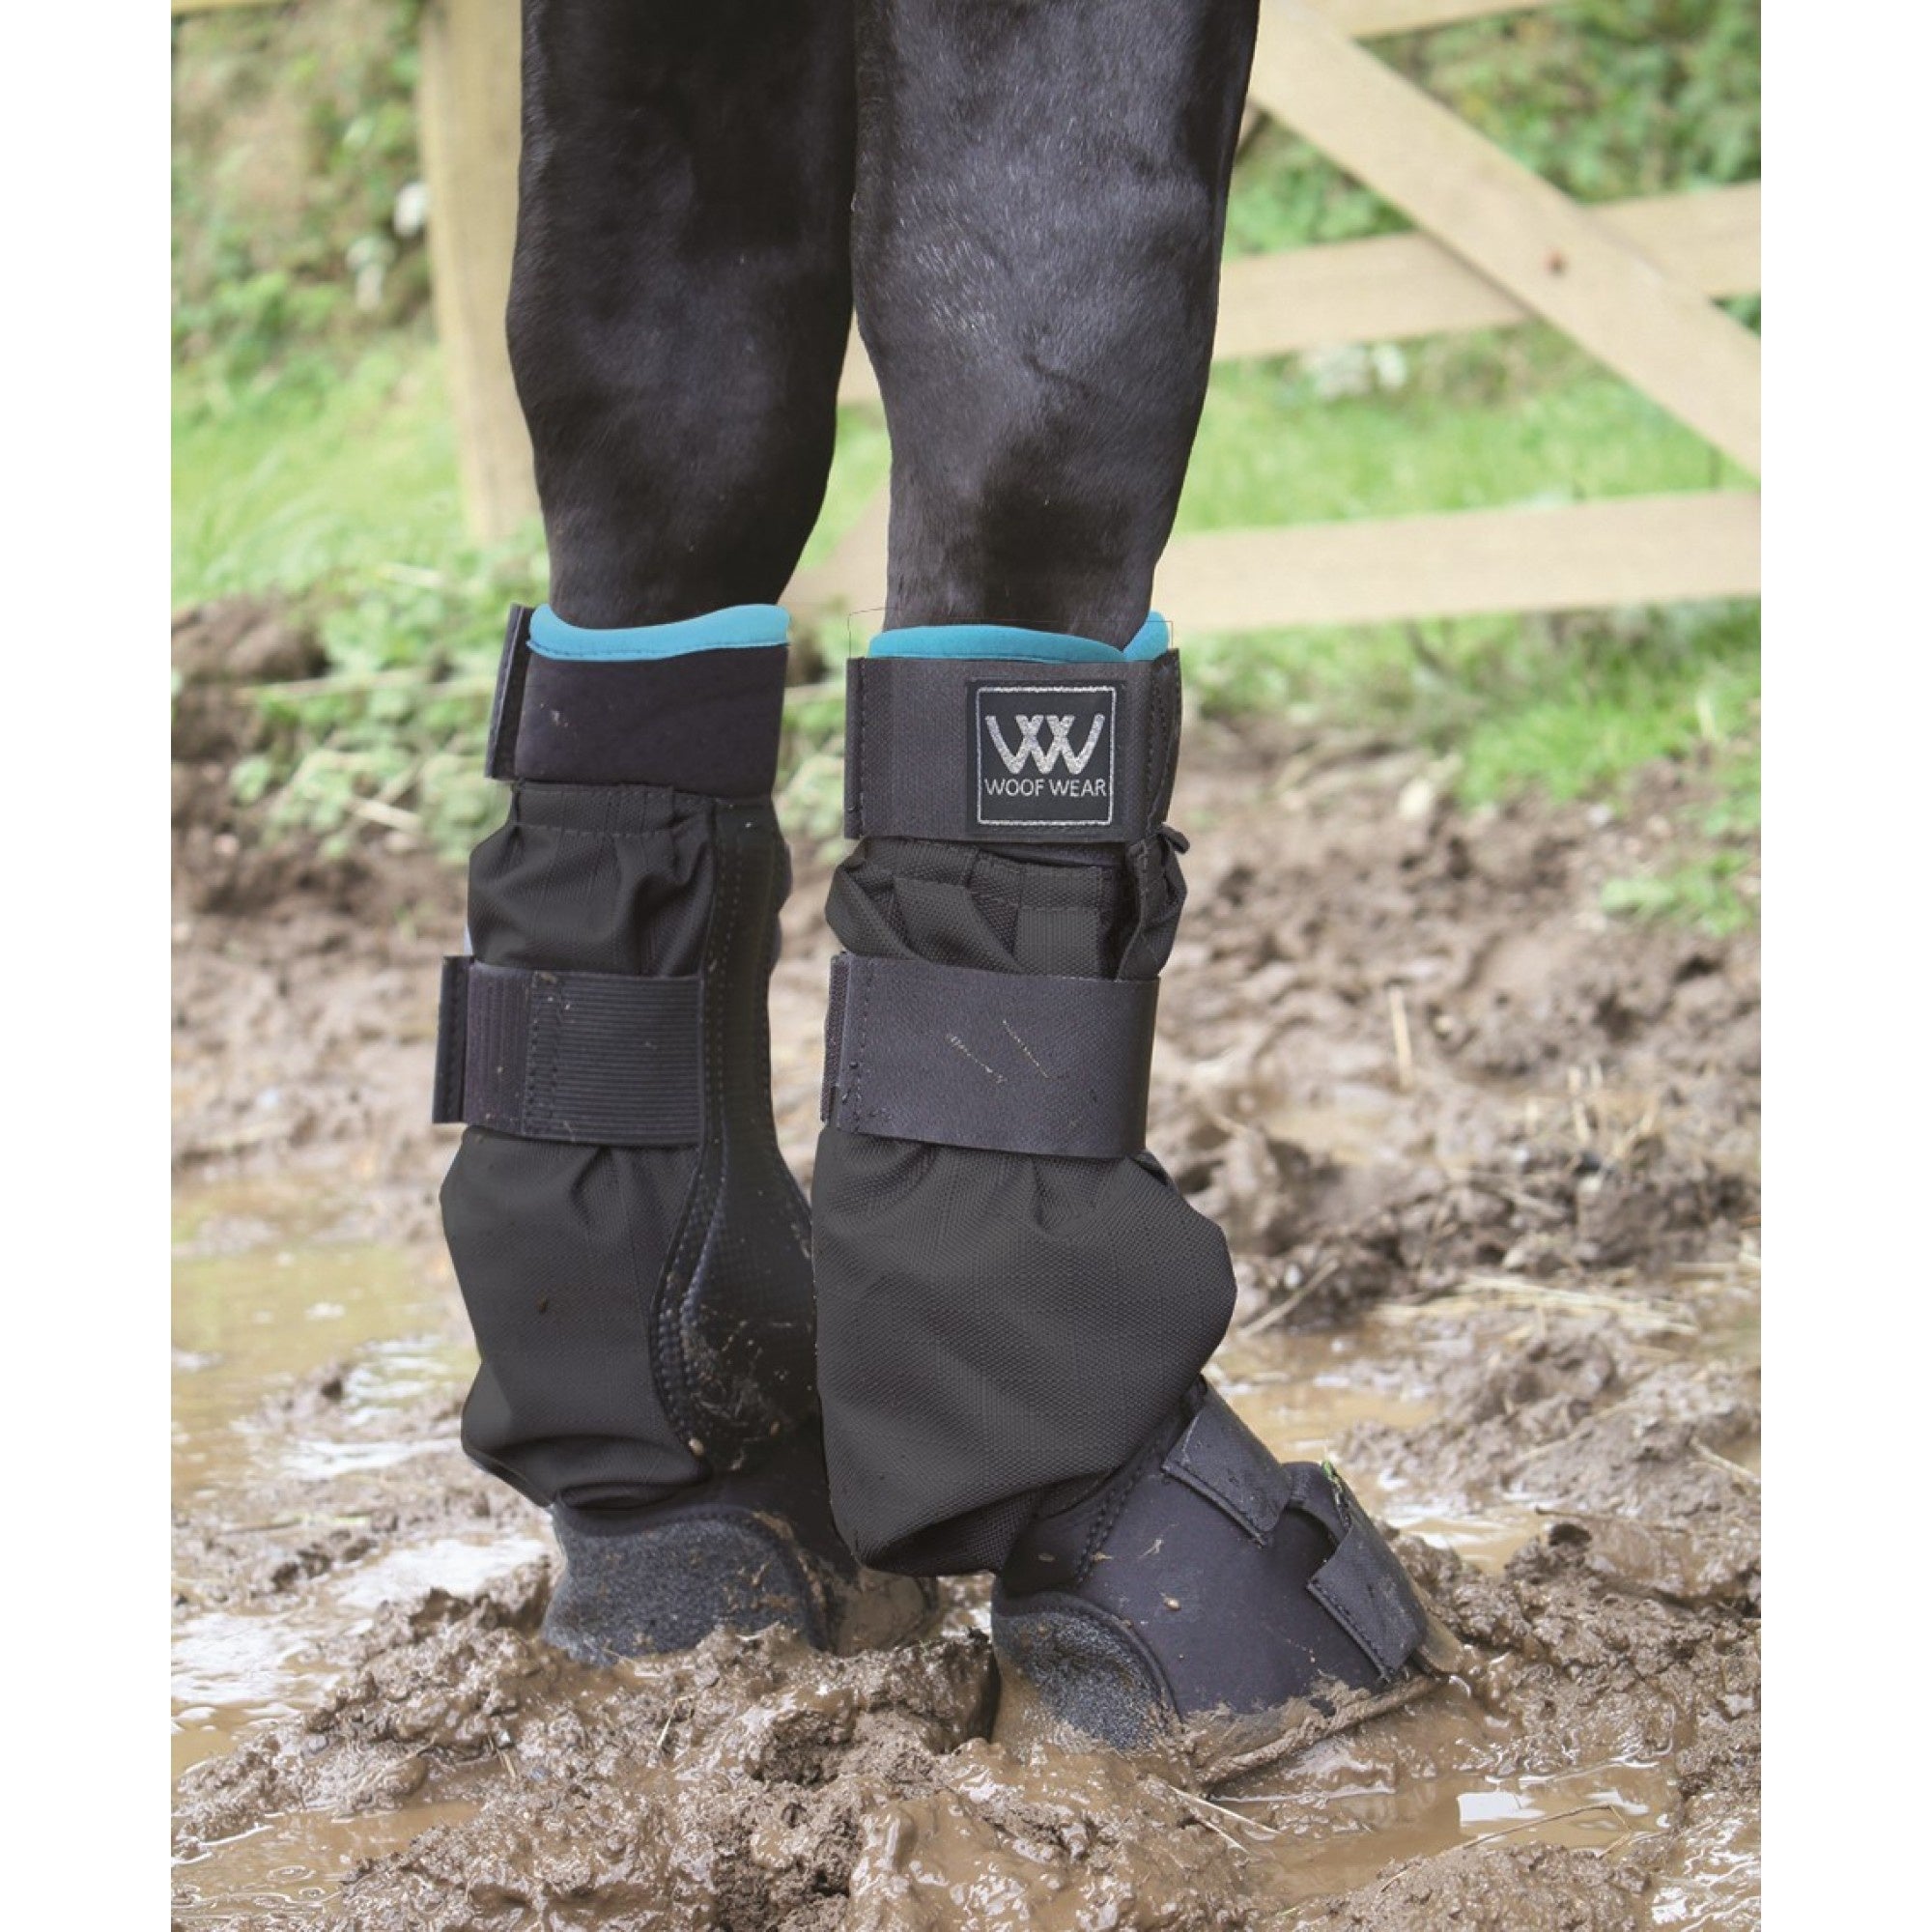 ARMA Fly Turnout Socks for Horses